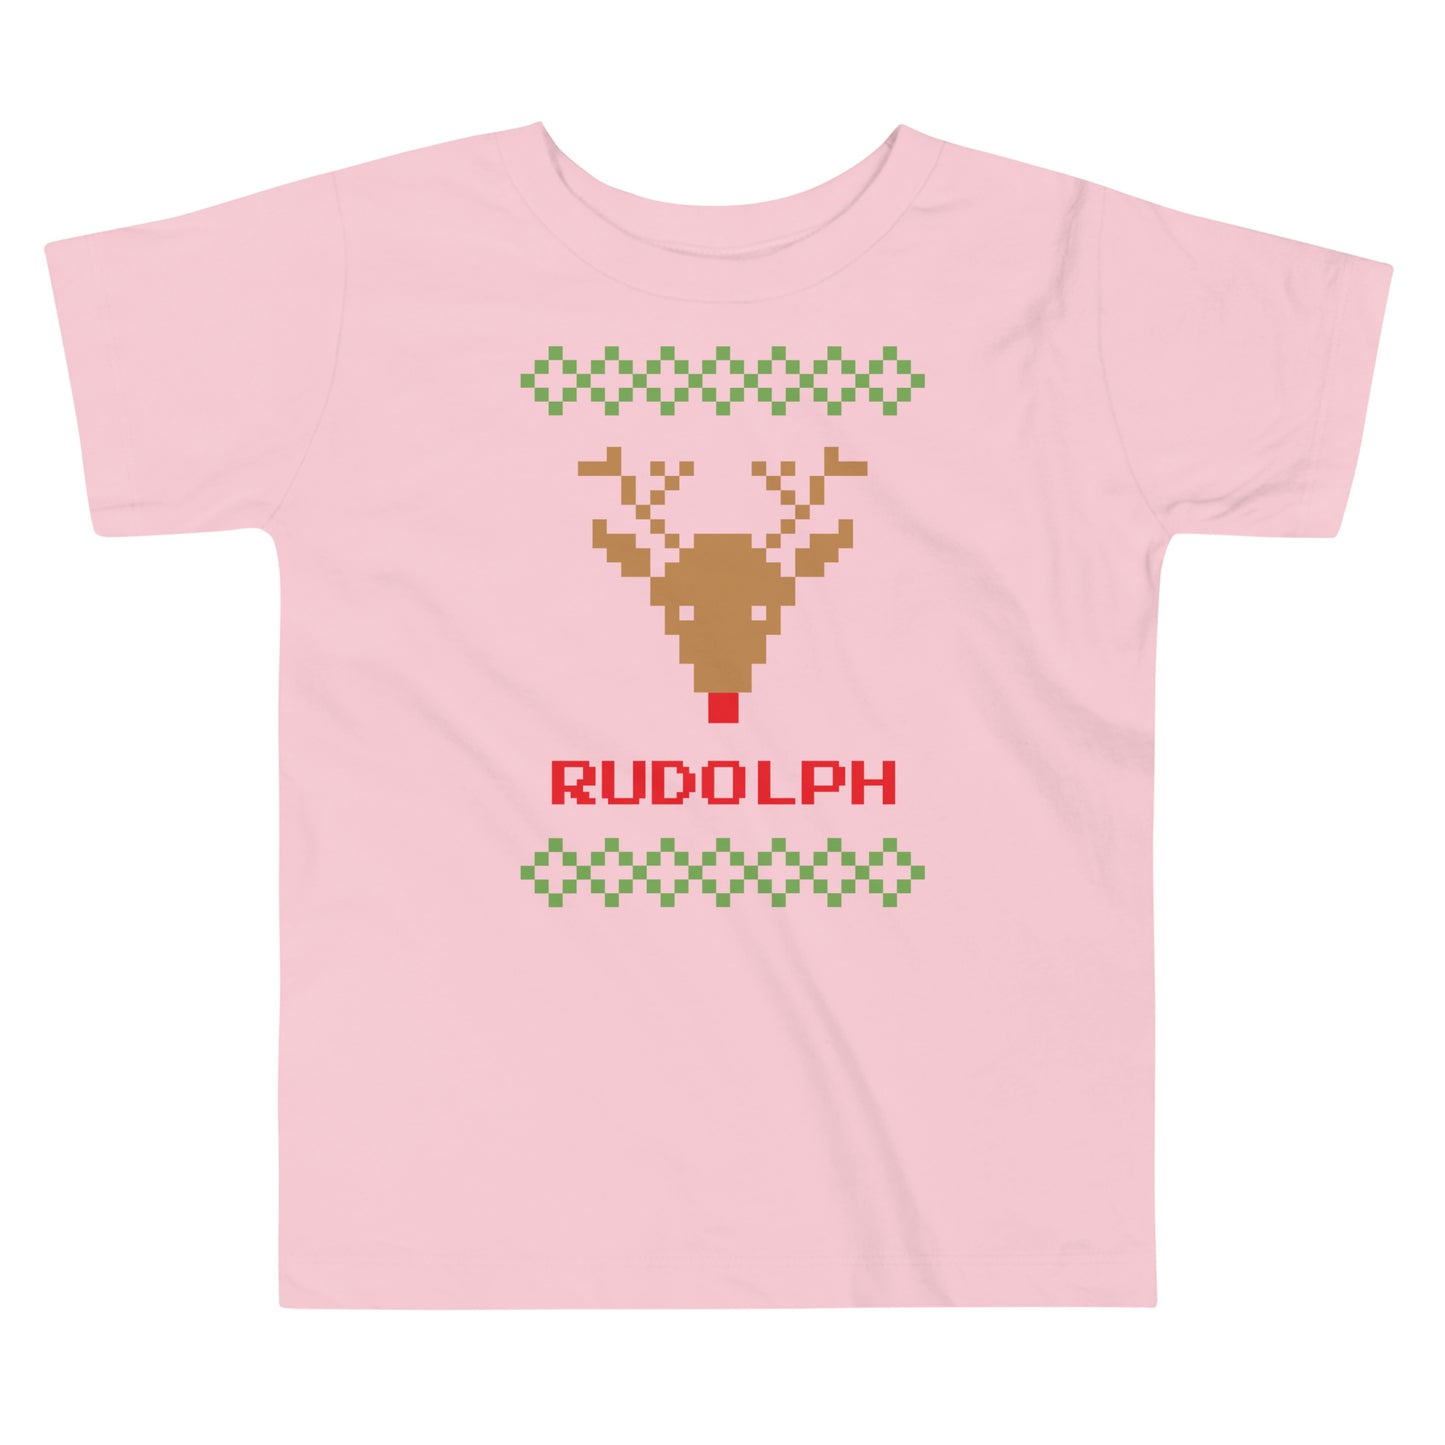 Pink t-shirt with a pixeled picture of a reindeer and the word “Rudolph” 